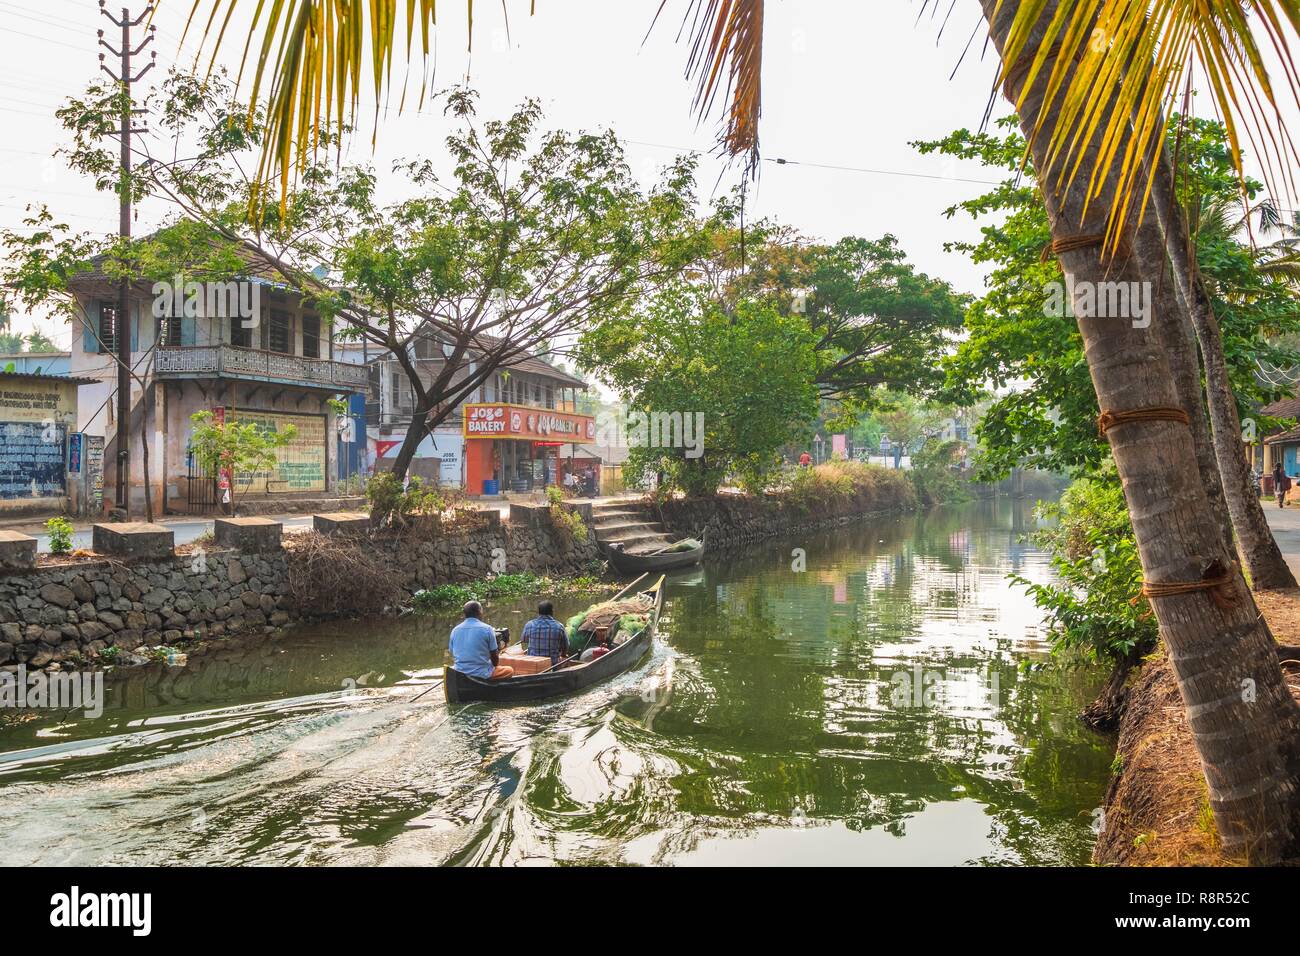 India, state of Kerala, Kumarakom, village set in the backdrop of the Vembanad Lake, the edges of the canal connecting the lake Stock Photo